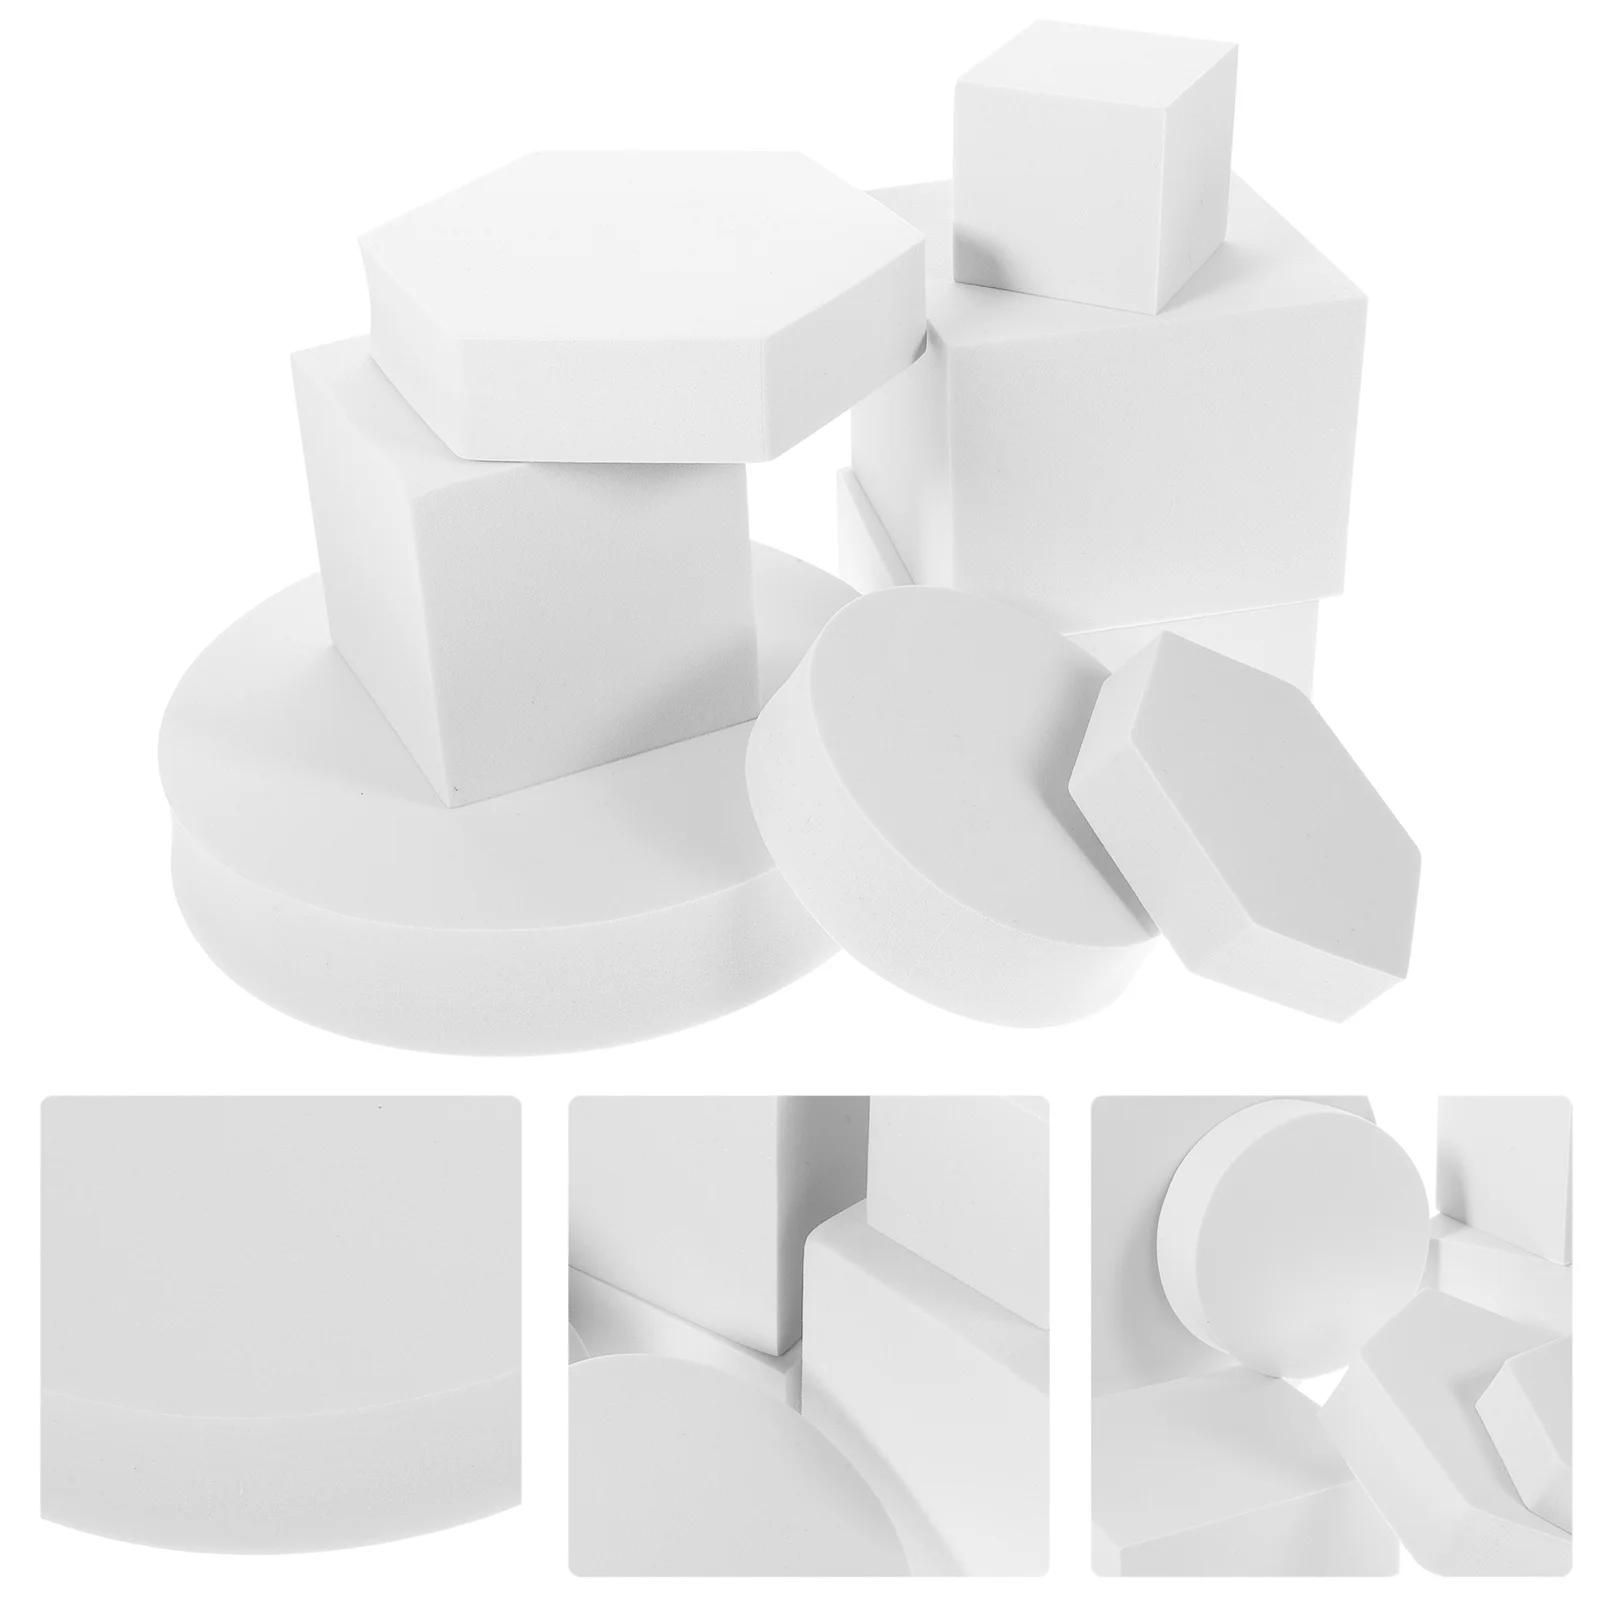 

8 Pcs Geometric Three-dimensional Ornaments Cube Photo Props Jewelry Product White Decor Geometry Photography Posing Shooting